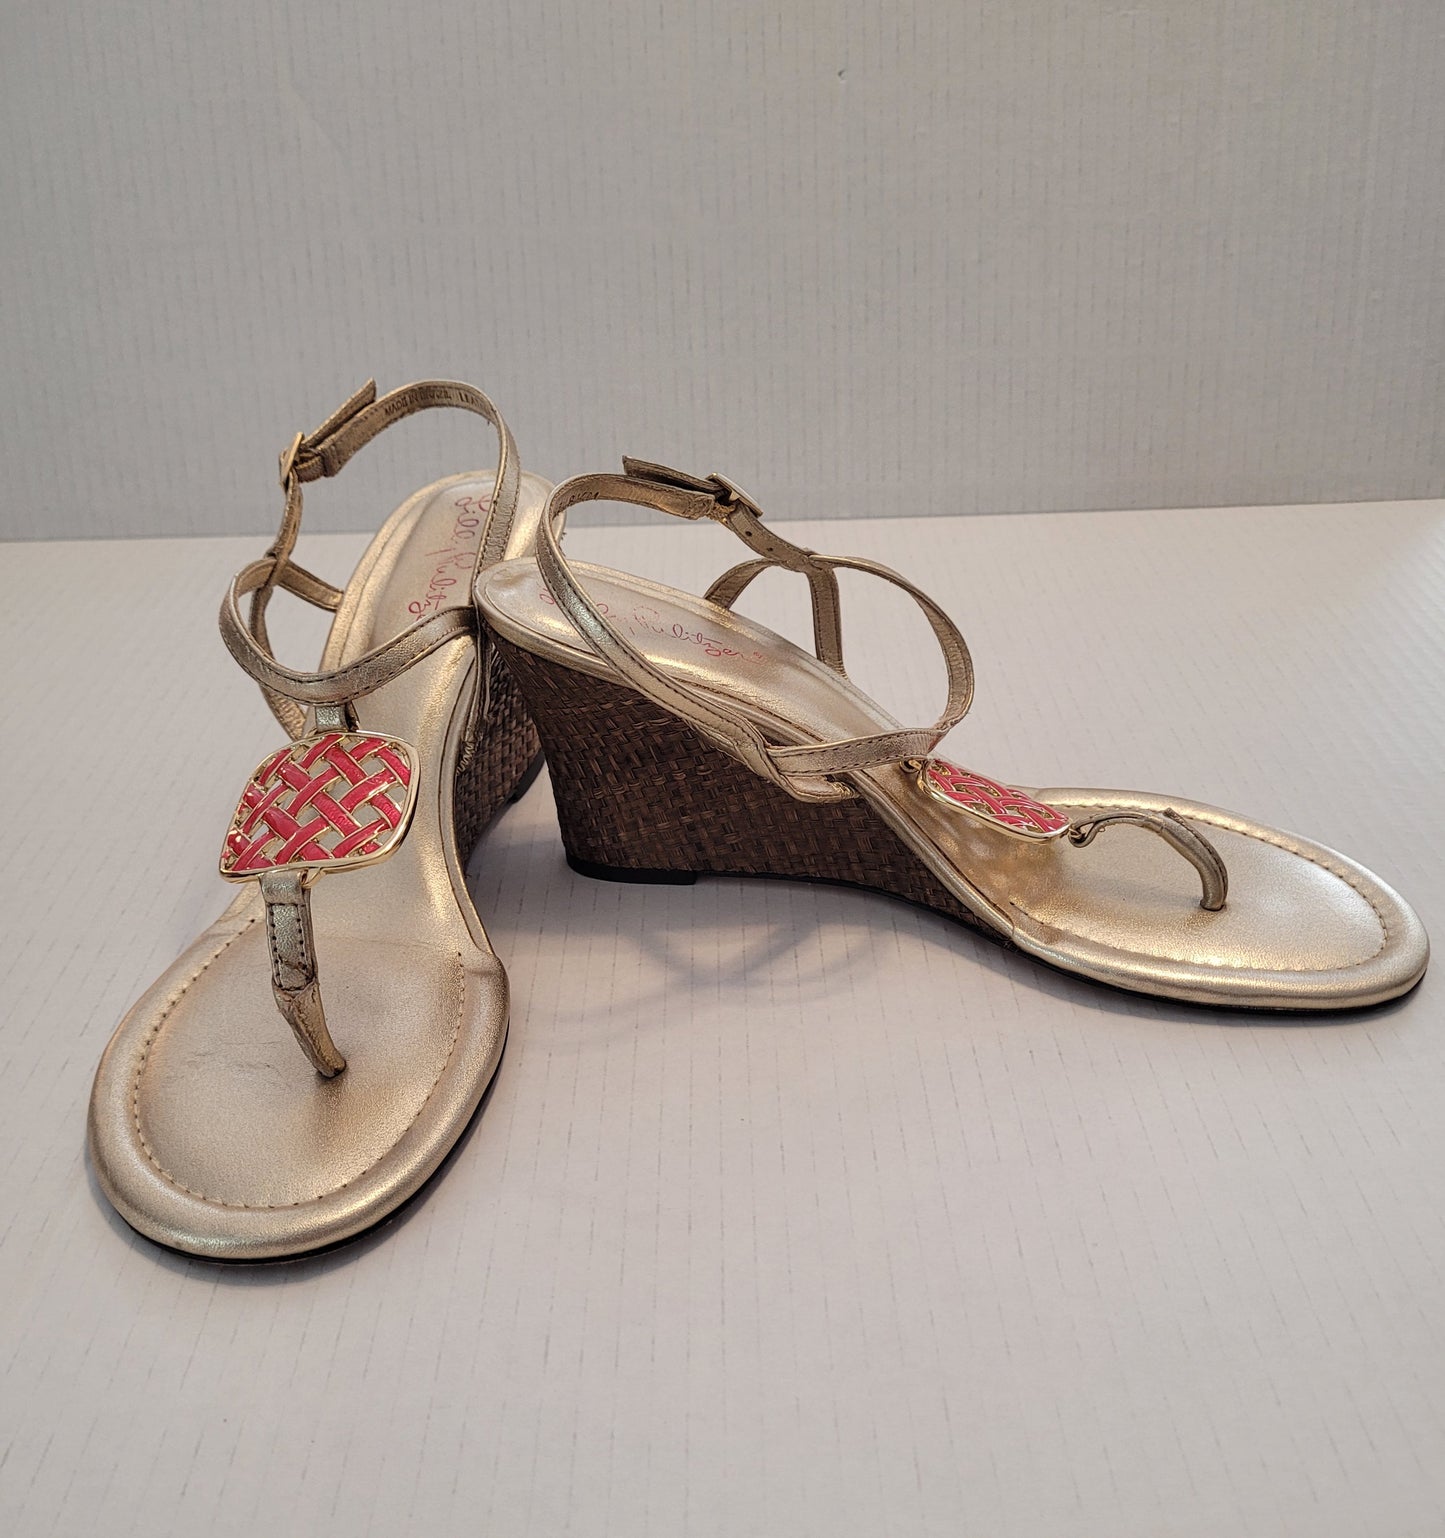 Lilly Pulitzer Women's Gold Jewel Wedge Sandals Size 8.5